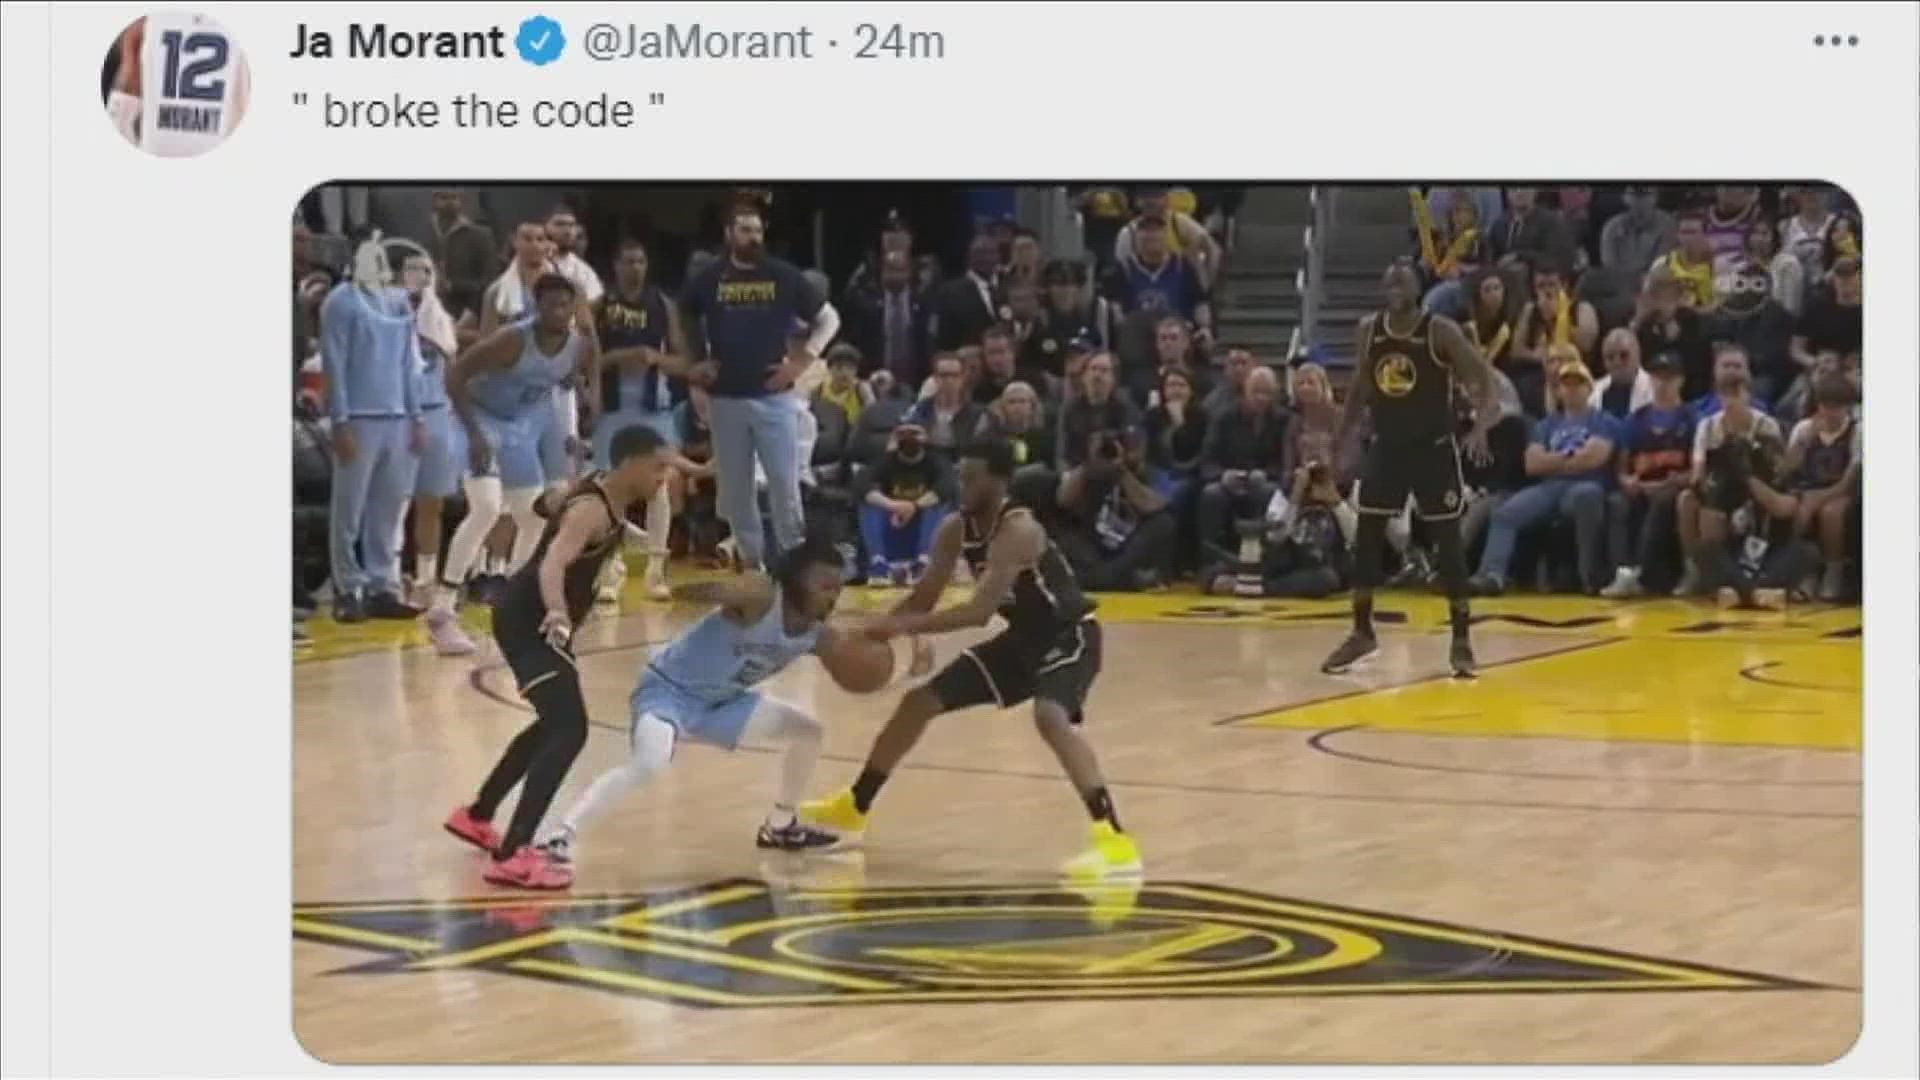 A play from Game 3 with Jordan Poole caused a discomfort in Morant's knee that triggered a potential injury, according to Grizzlies head coach Taylor Jenkins.